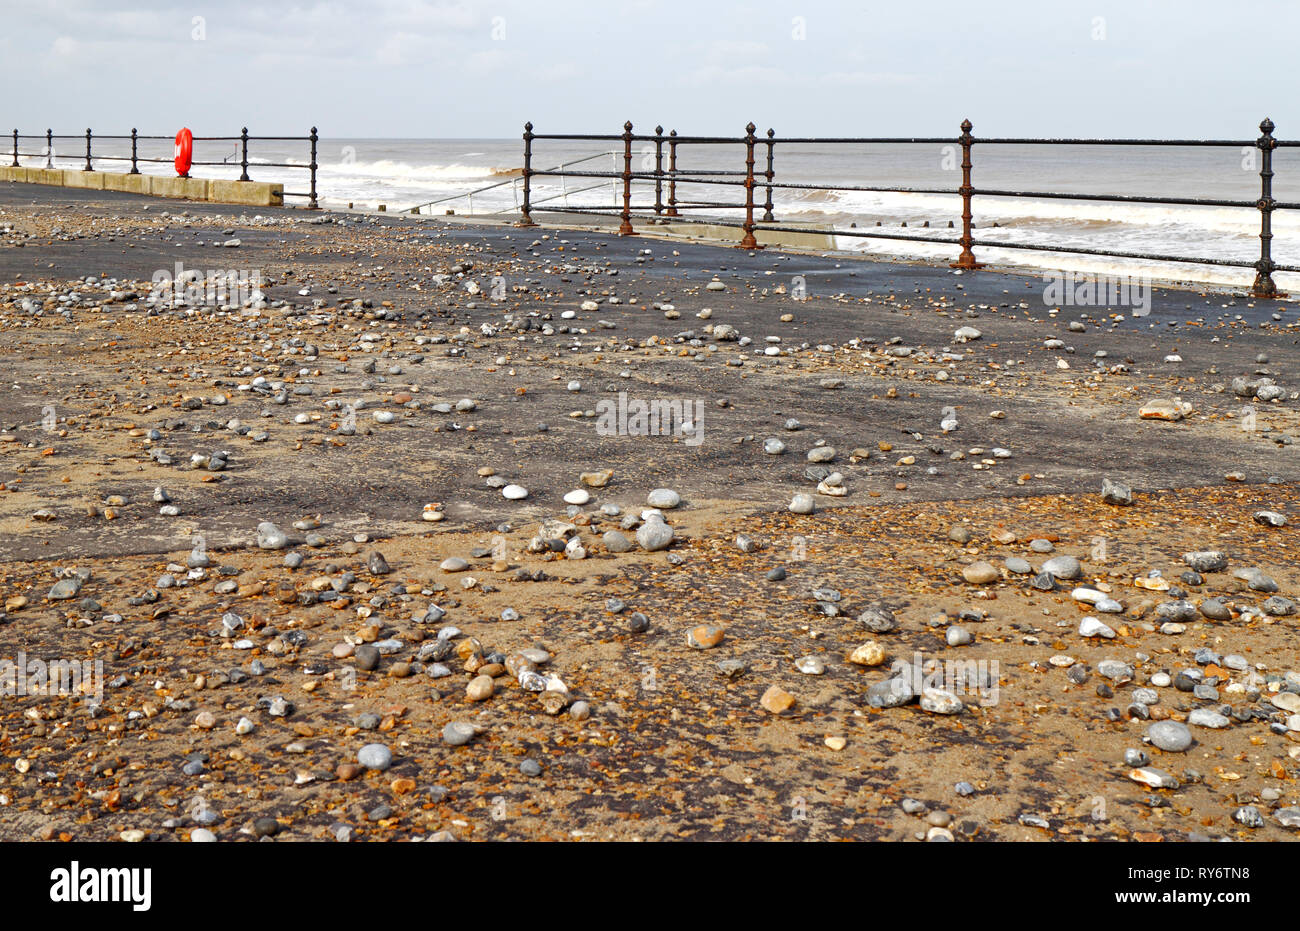 A view of the west promenade covered in stones thrown up by high seas on the North Norfolk coast at Cromer, Norfolk, England, United Kingdom, Europe. Stock Photo